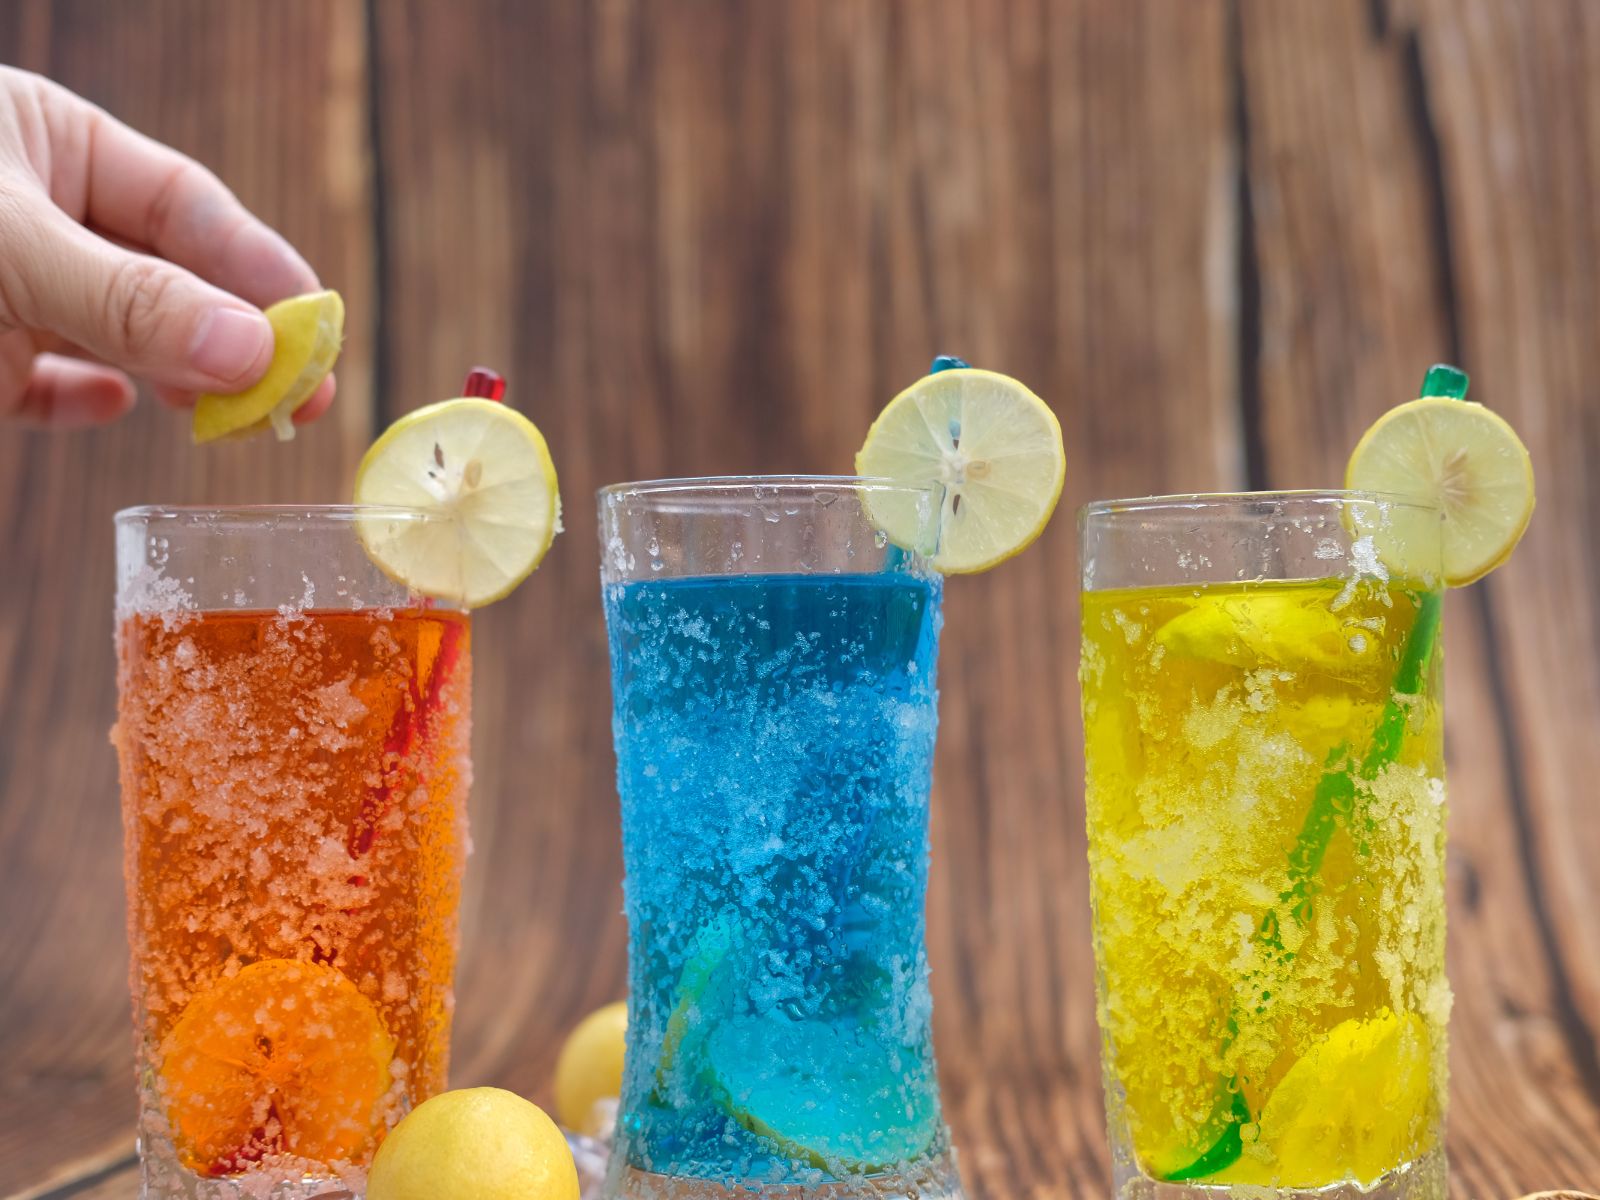 Three mocktails of different colors (orange, blue, and yellow). 